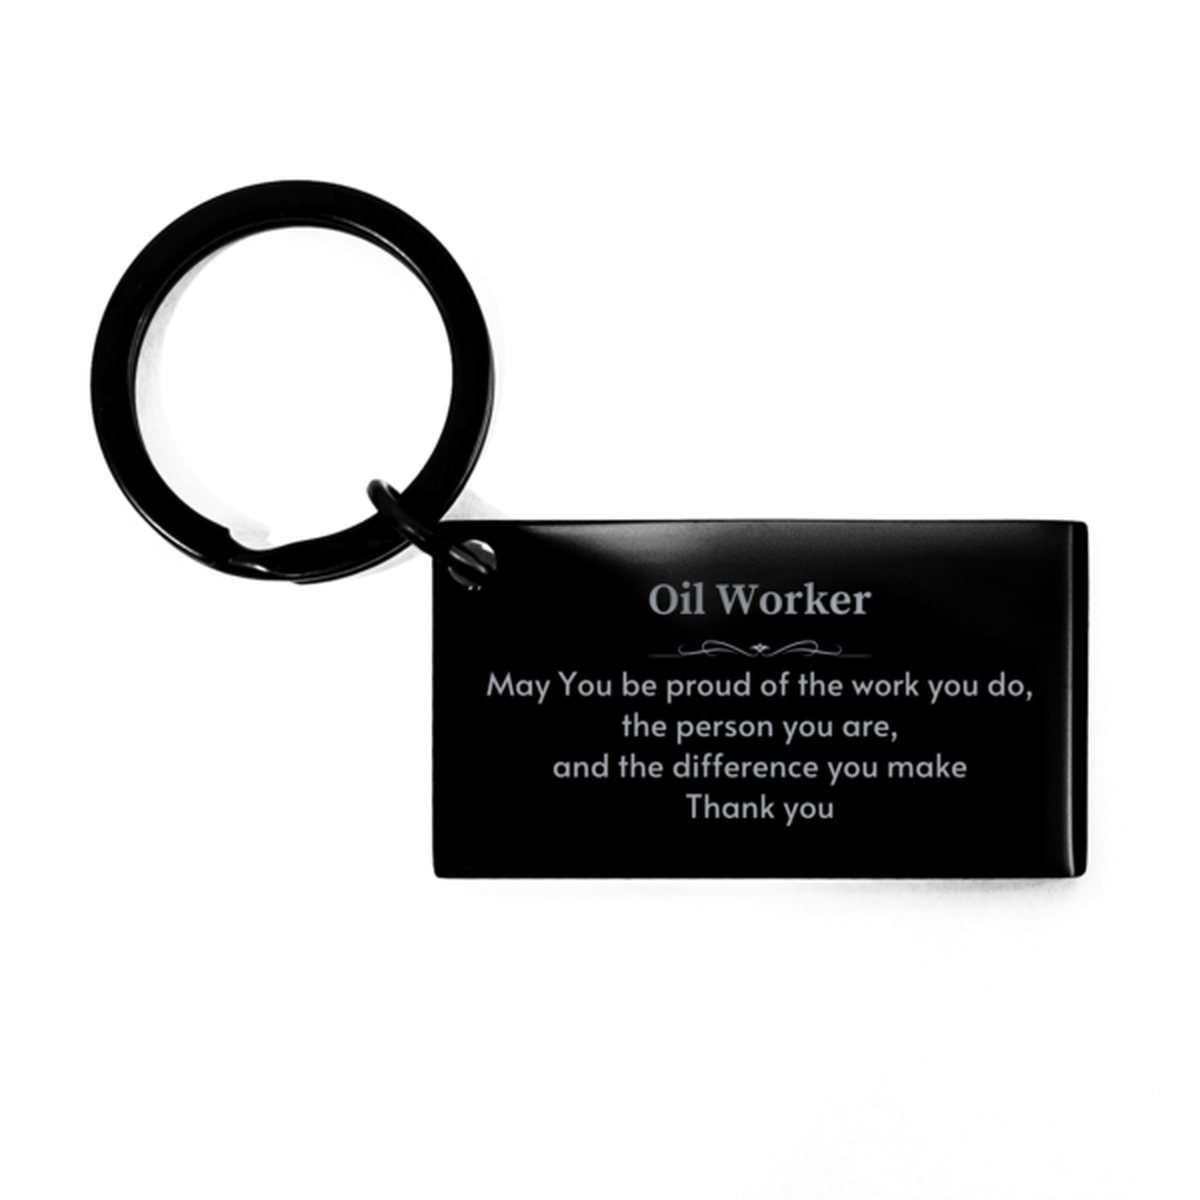 Heartwarming Keychain Retirement Coworkers Gifts for Oil Worker, Physician Assistant May You be proud of the work you do, the person you are Gifts for Boss Men Women Friends